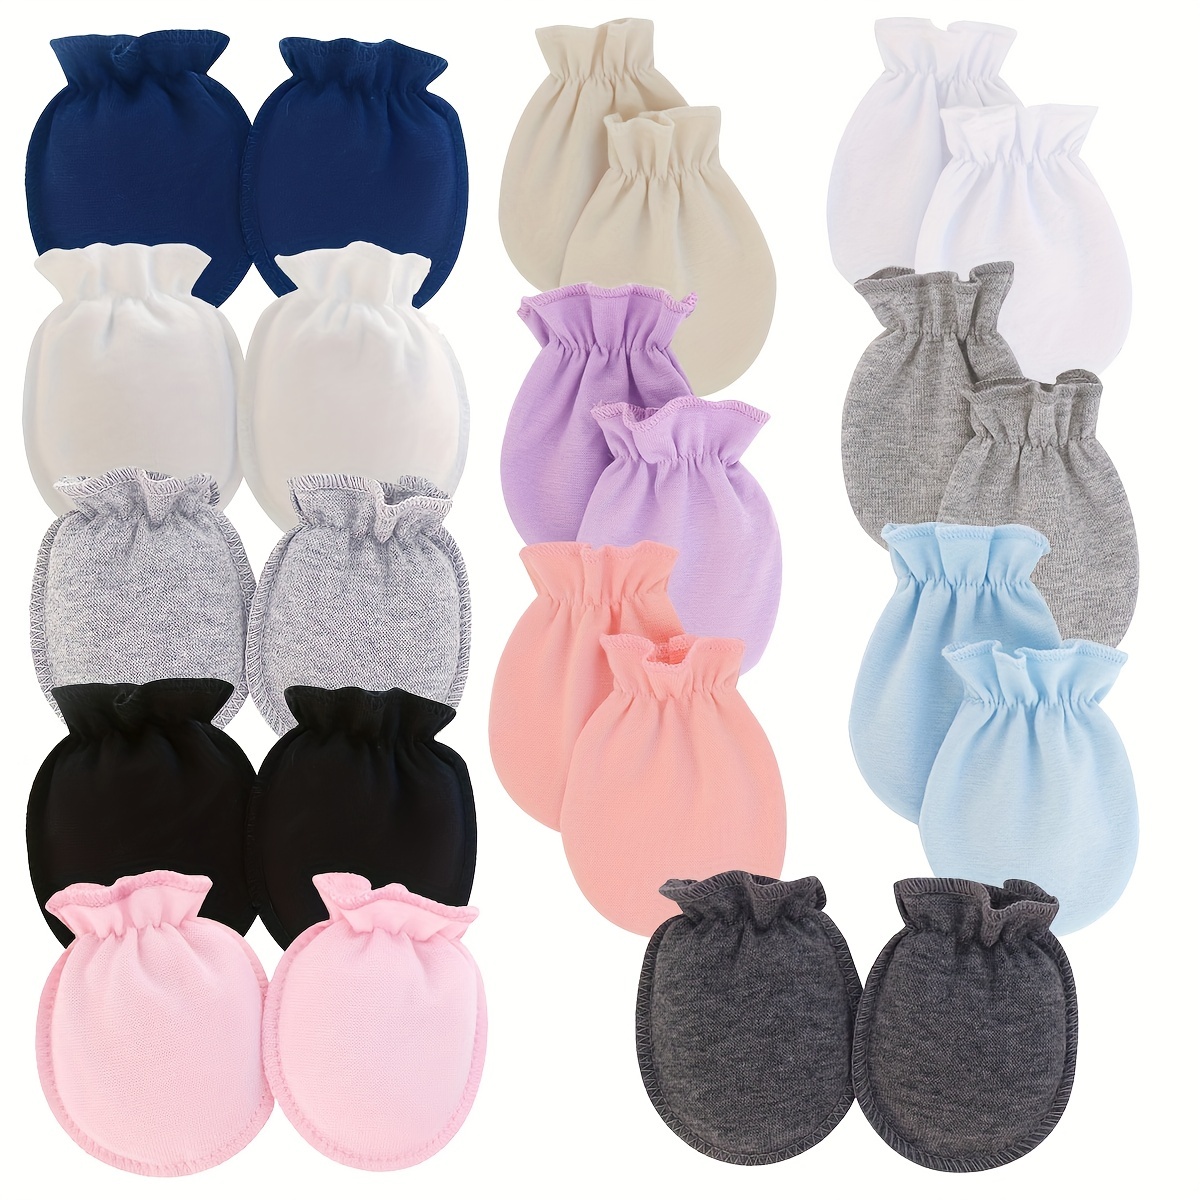 12 Pairs of Soft & Comfy Newborn Baby Mittens - Perfect For 0-6 Month Old Boys & Girls, Ideal choice for Gifts